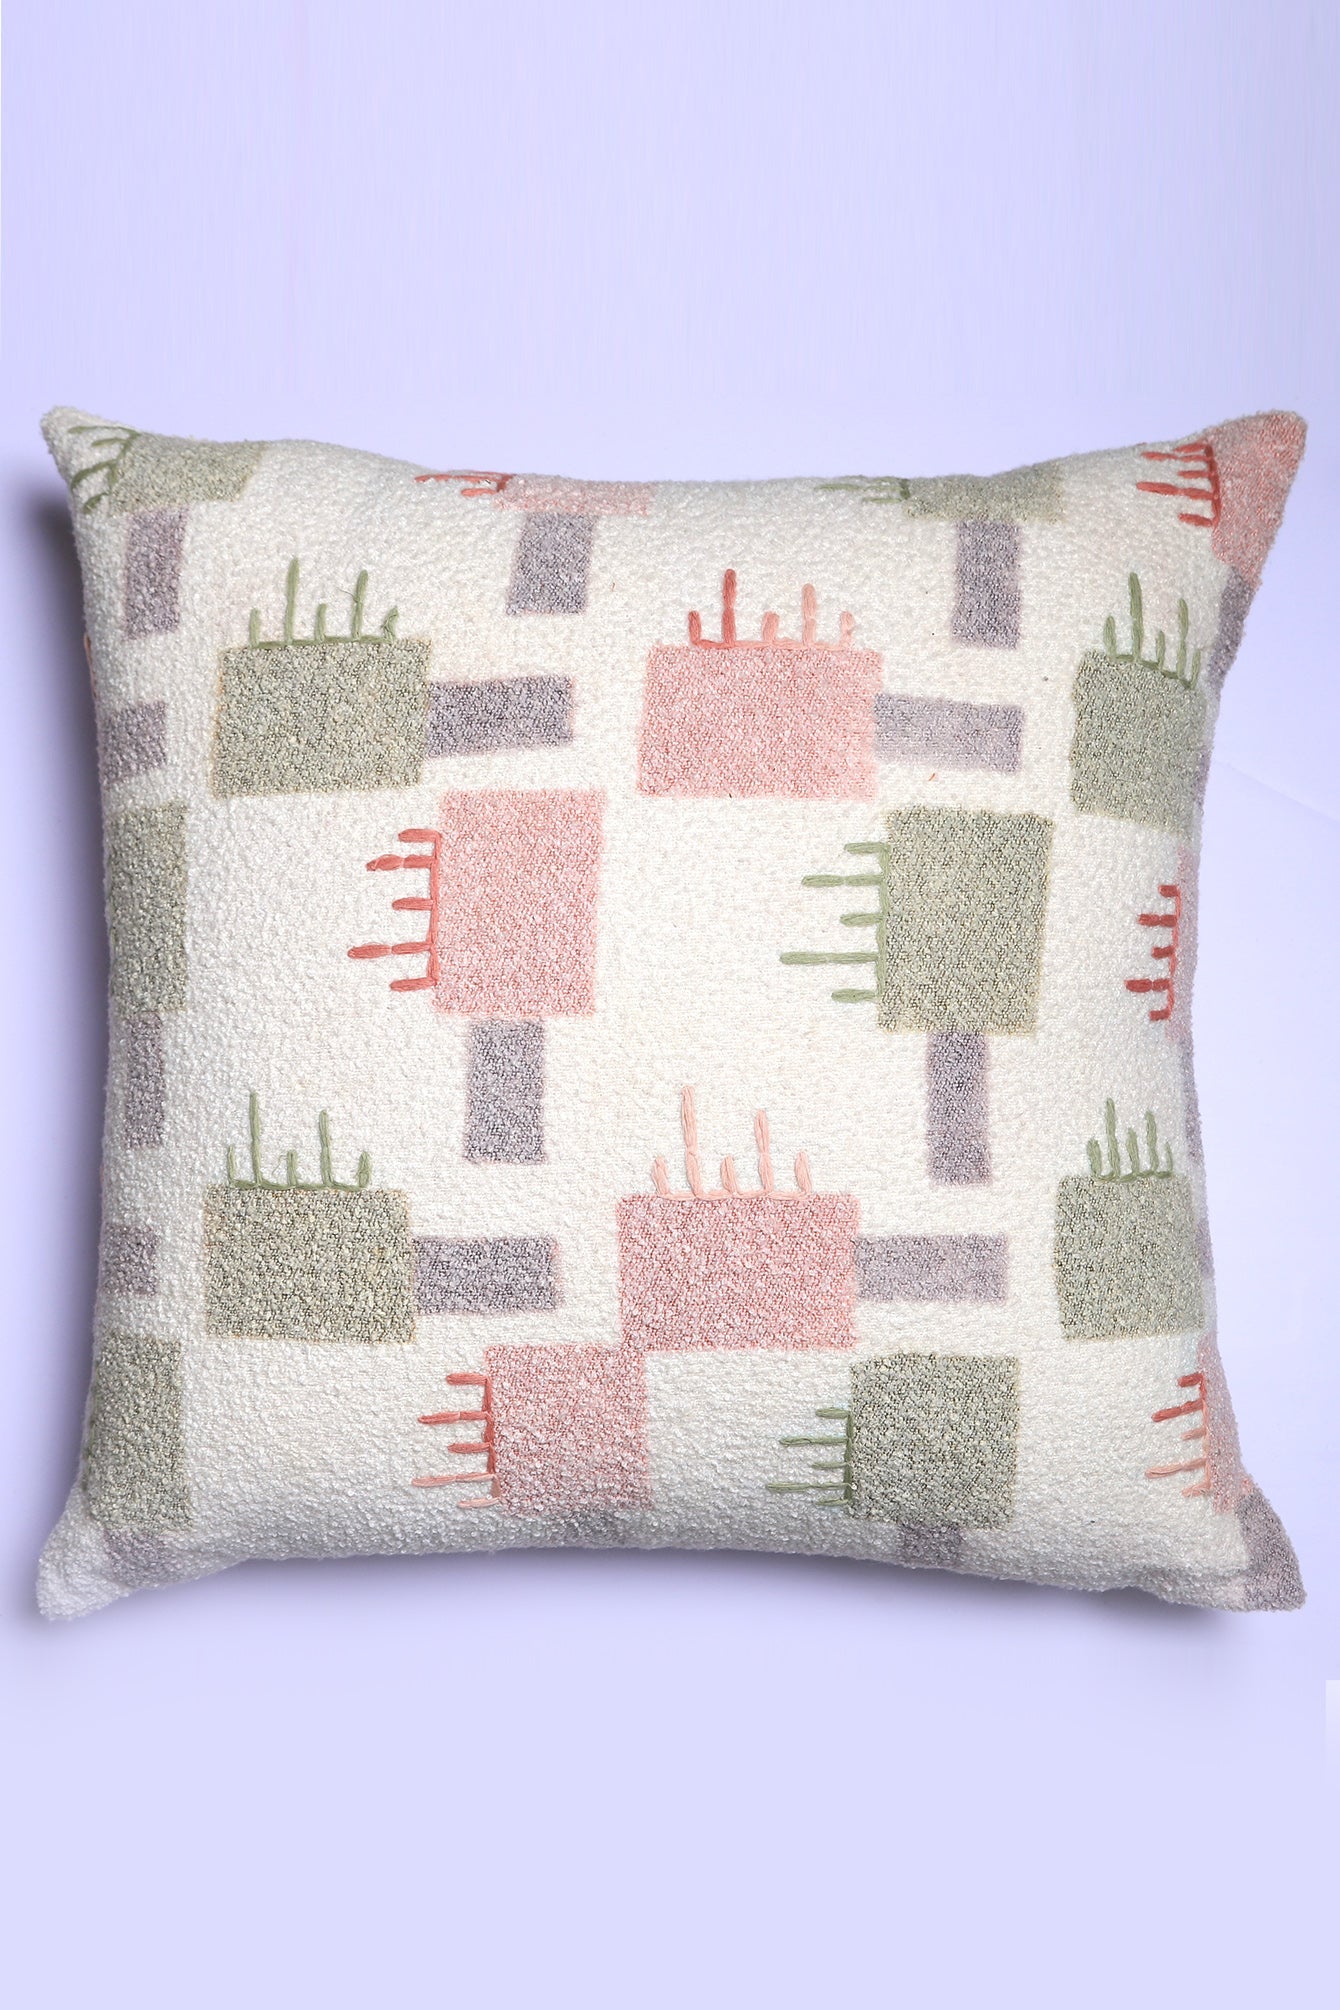 Kalofer Embroidery Block Printed Cushion Cover